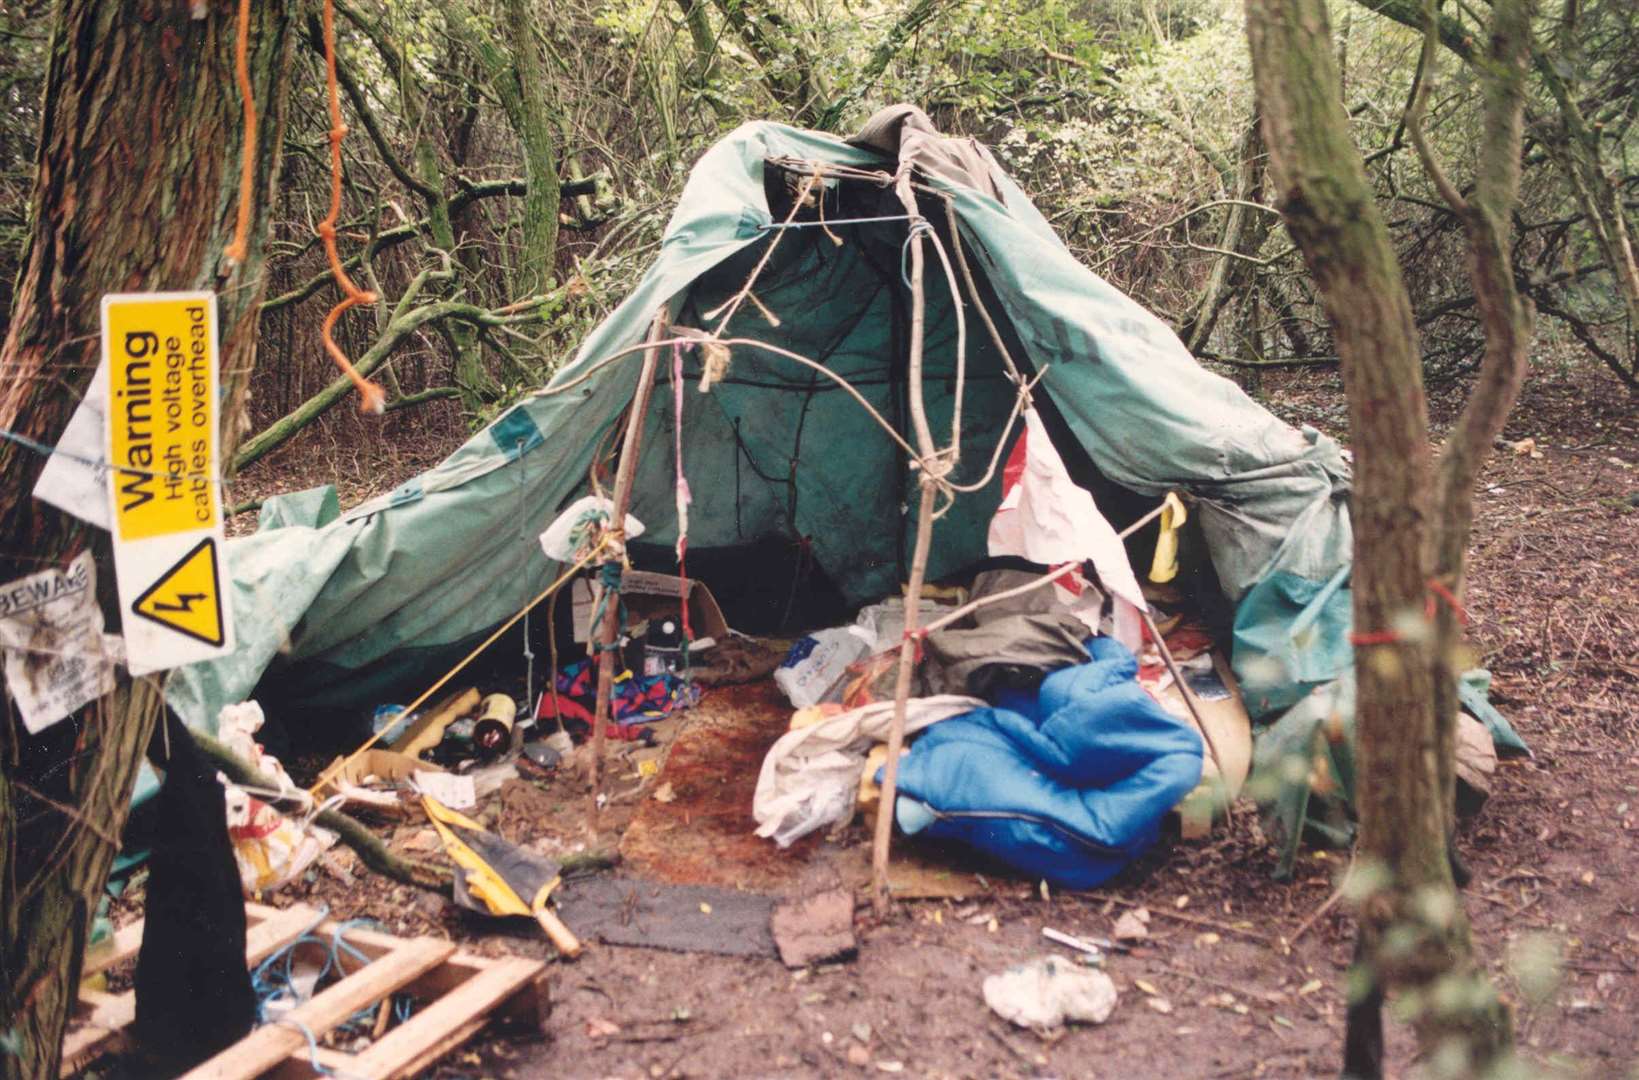 A camp used by the protesters